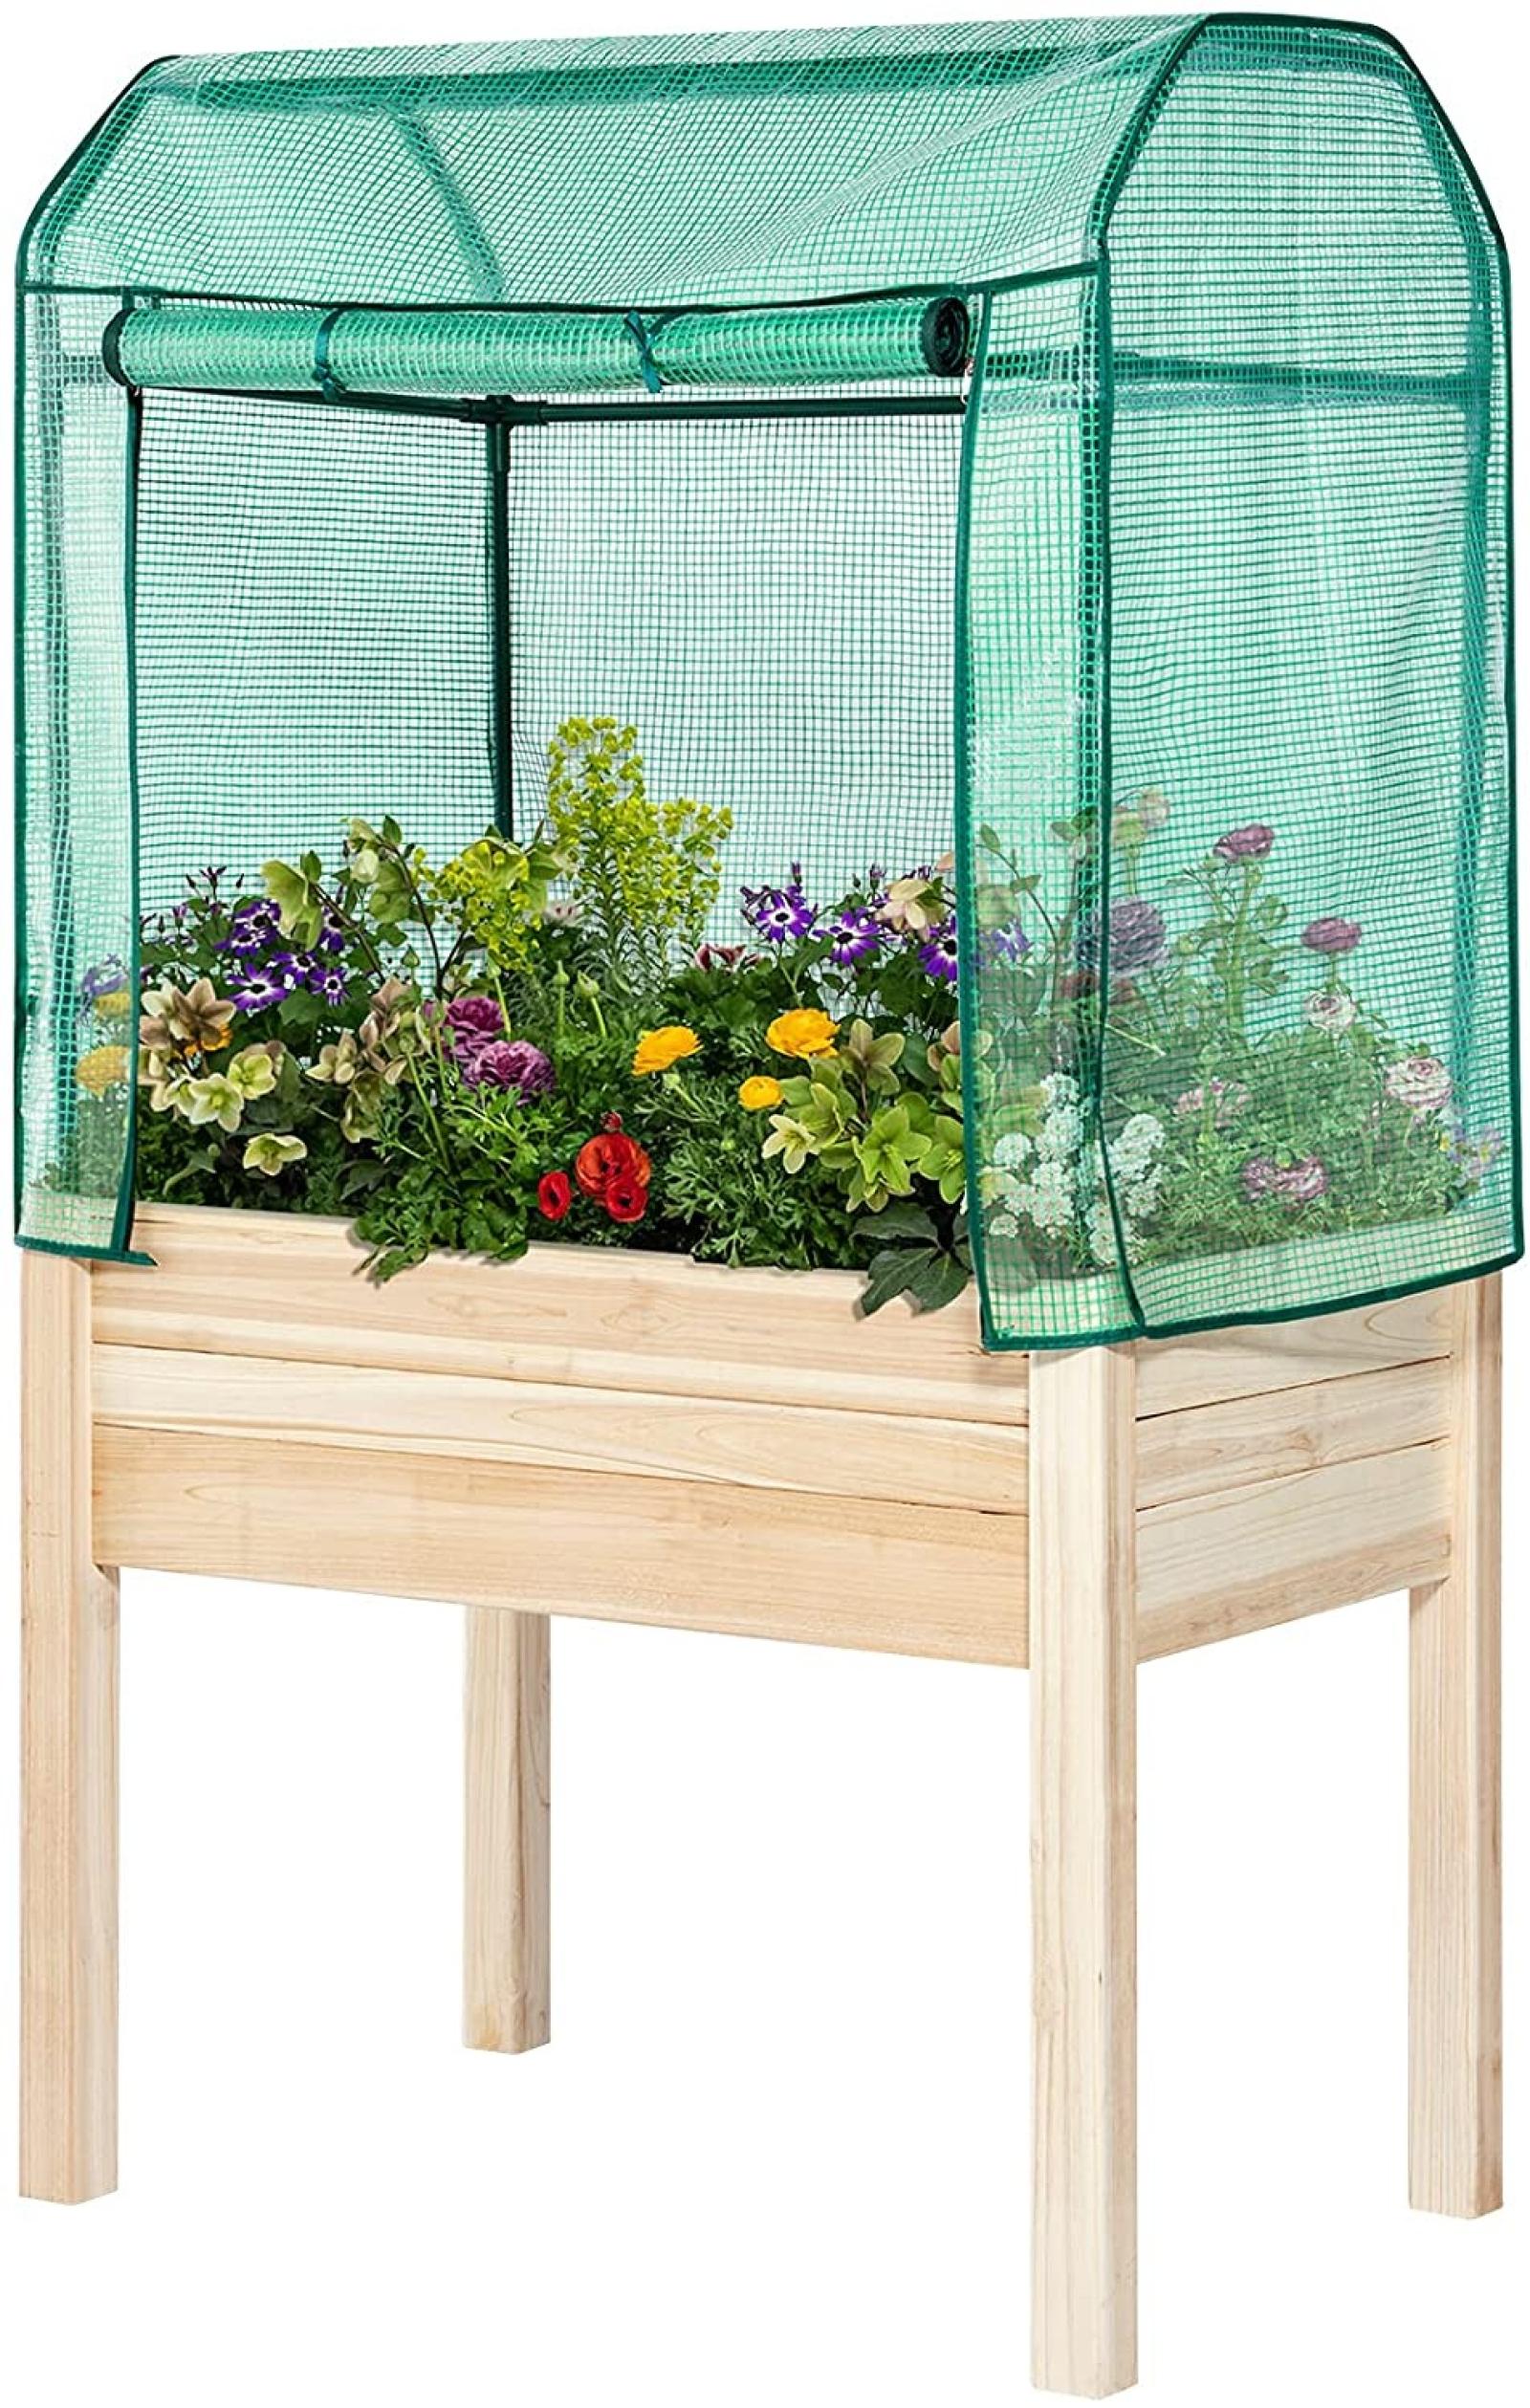 Backyard Expressions Elevated Gardening Bed & Greenhouse